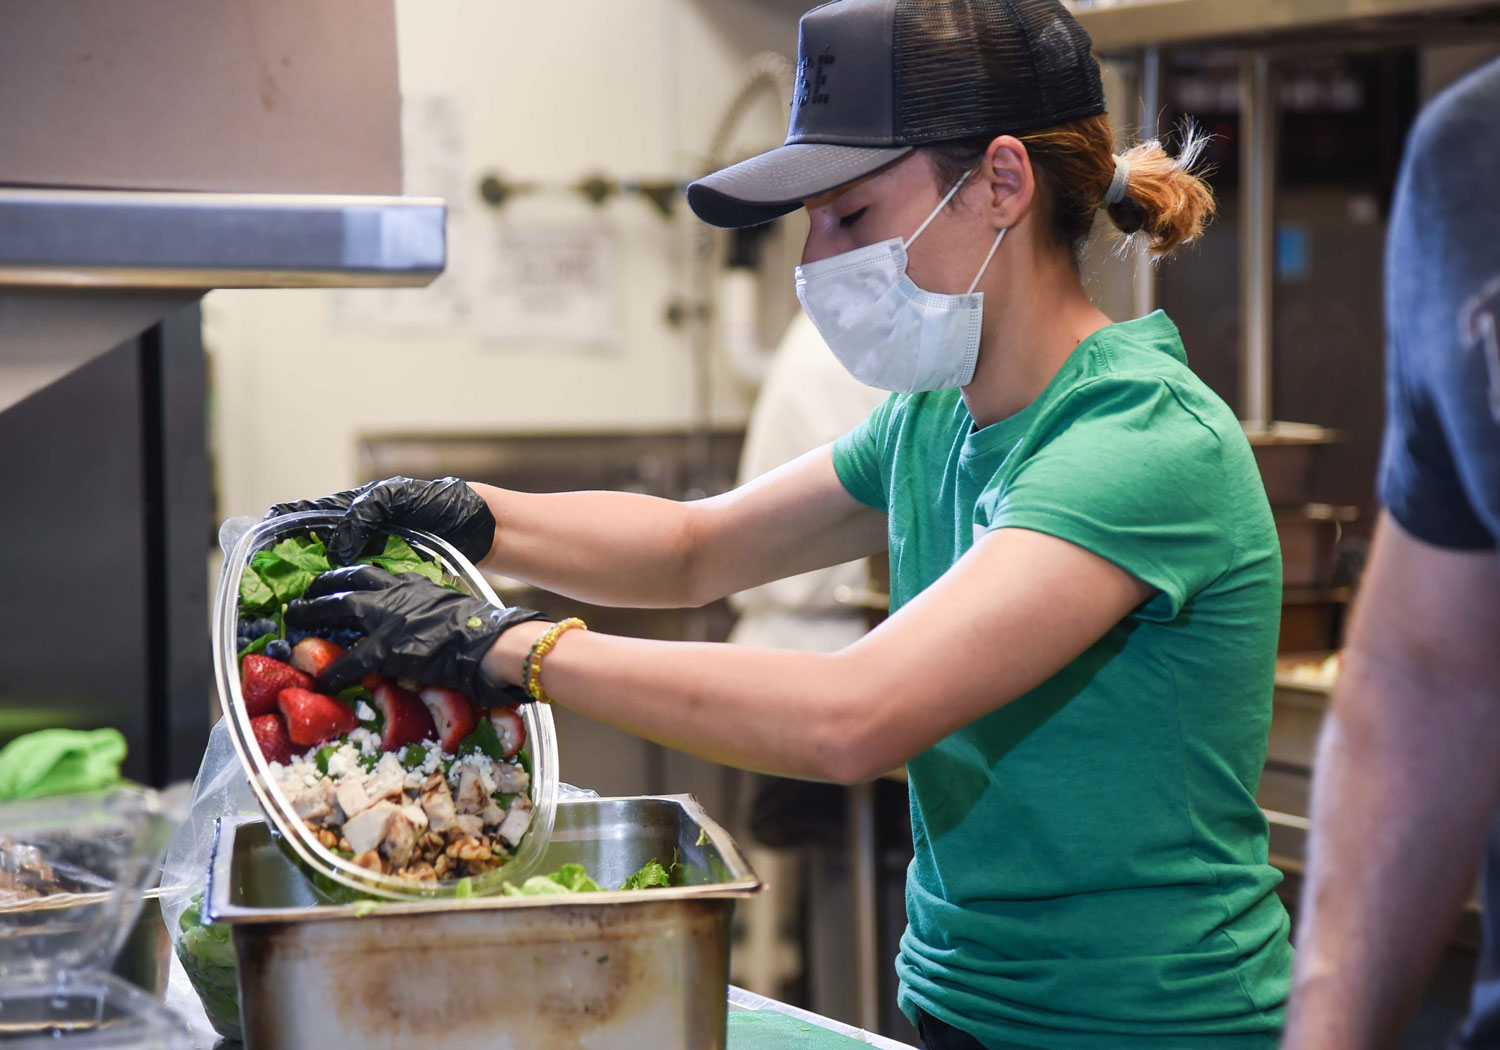 Volunteer Rosa Mendoza helps prepare a salad as part of the 800 meals OurCalling serves to those in need each weekday // courtesy of Klekamp Group